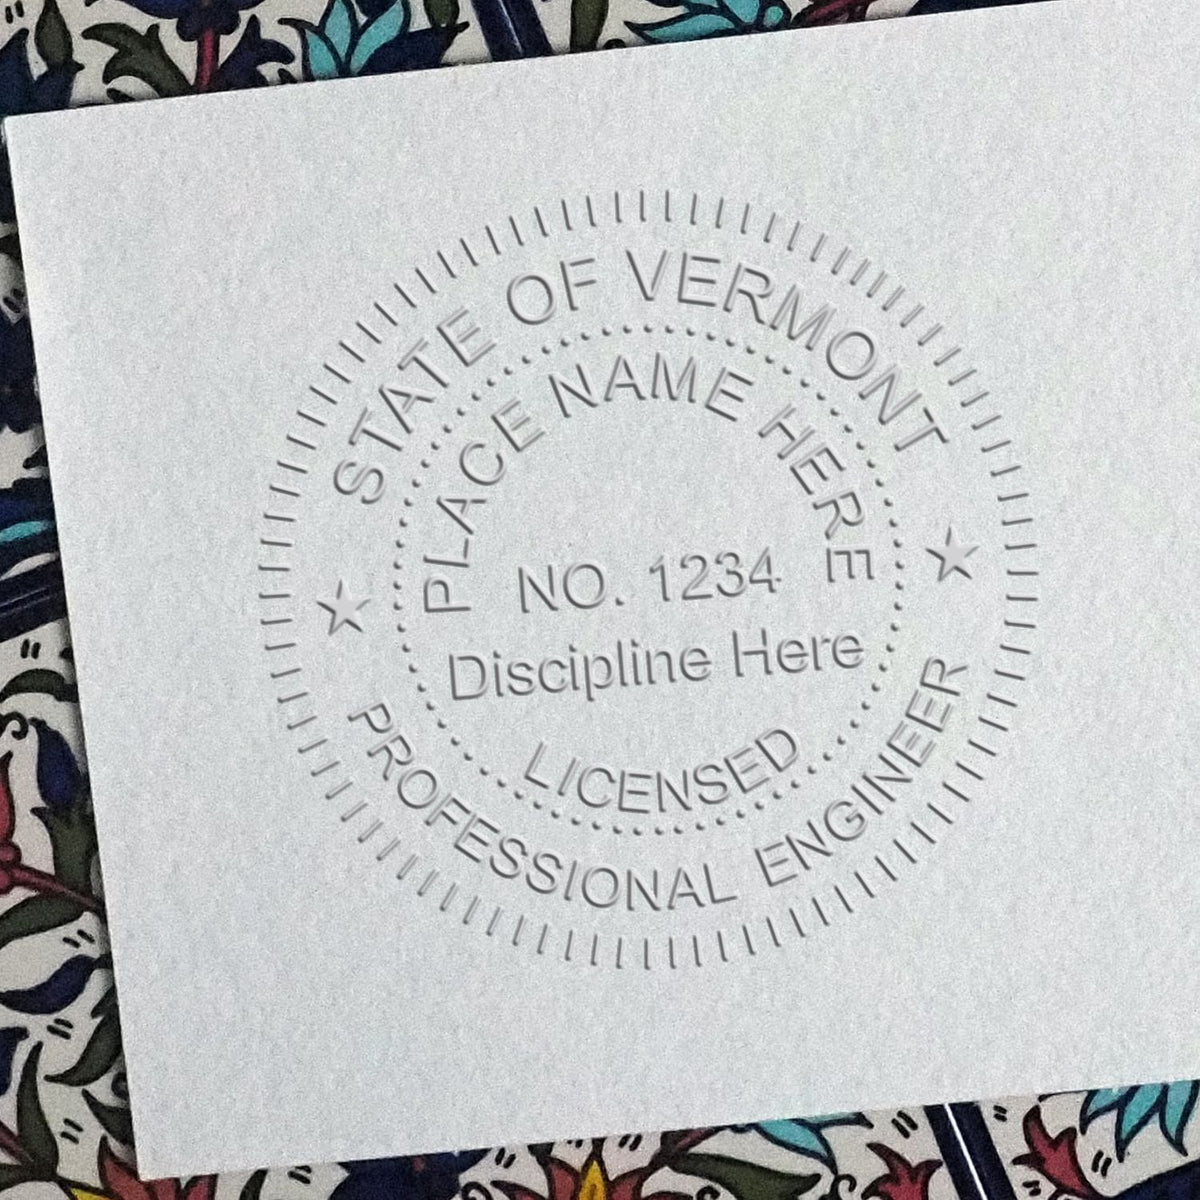 A photograph of the Soft Vermont Professional Engineer Seal stamp impression reveals a vivid, professional image of the on paper.